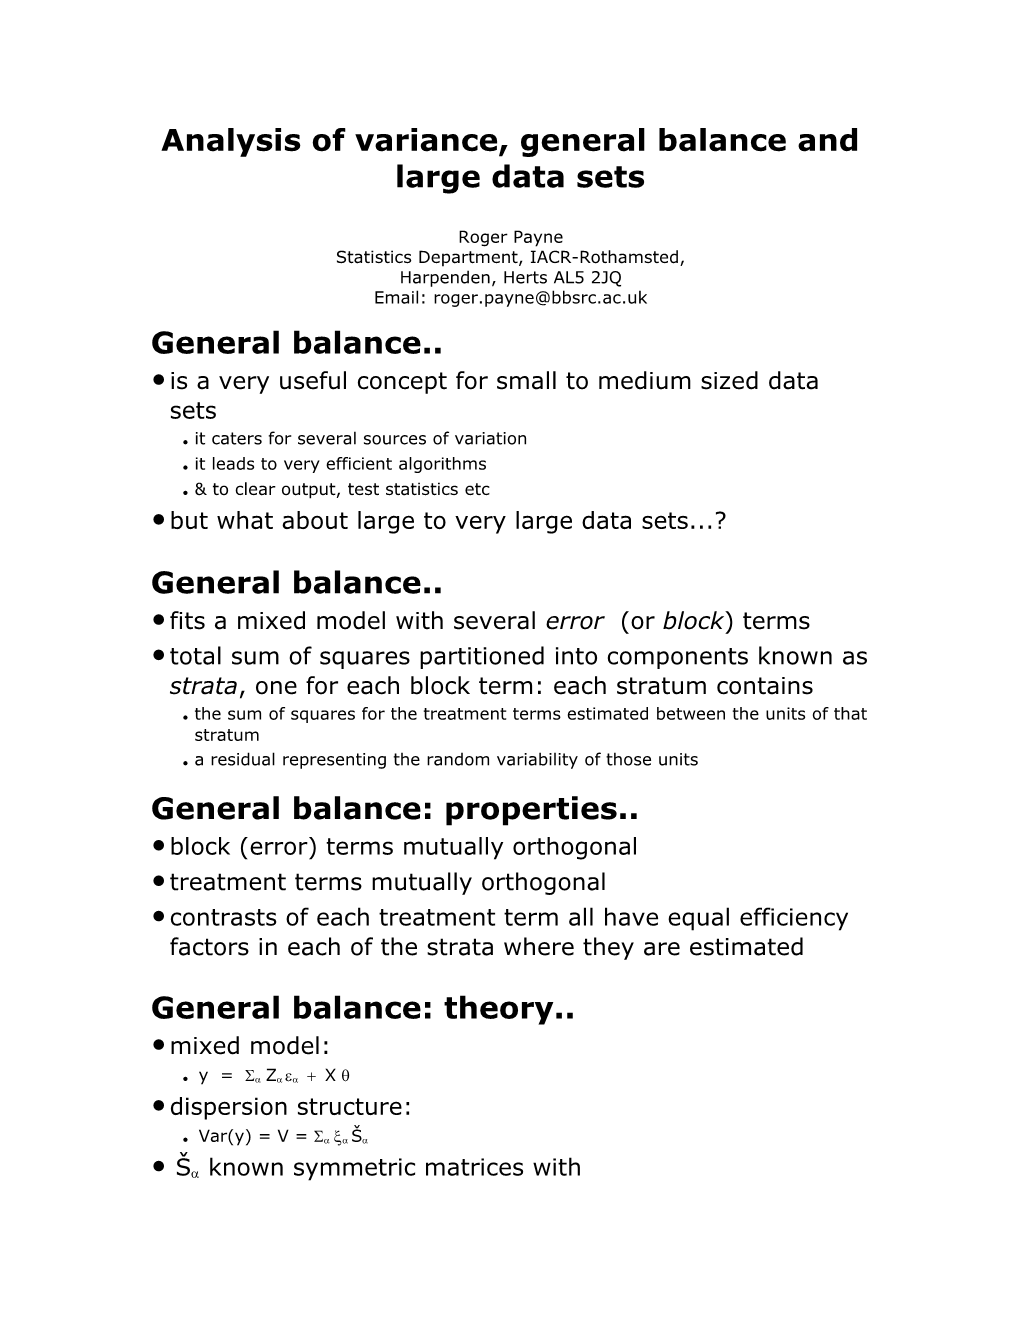 Analysis of Variance, General Balance and Large Data Sets